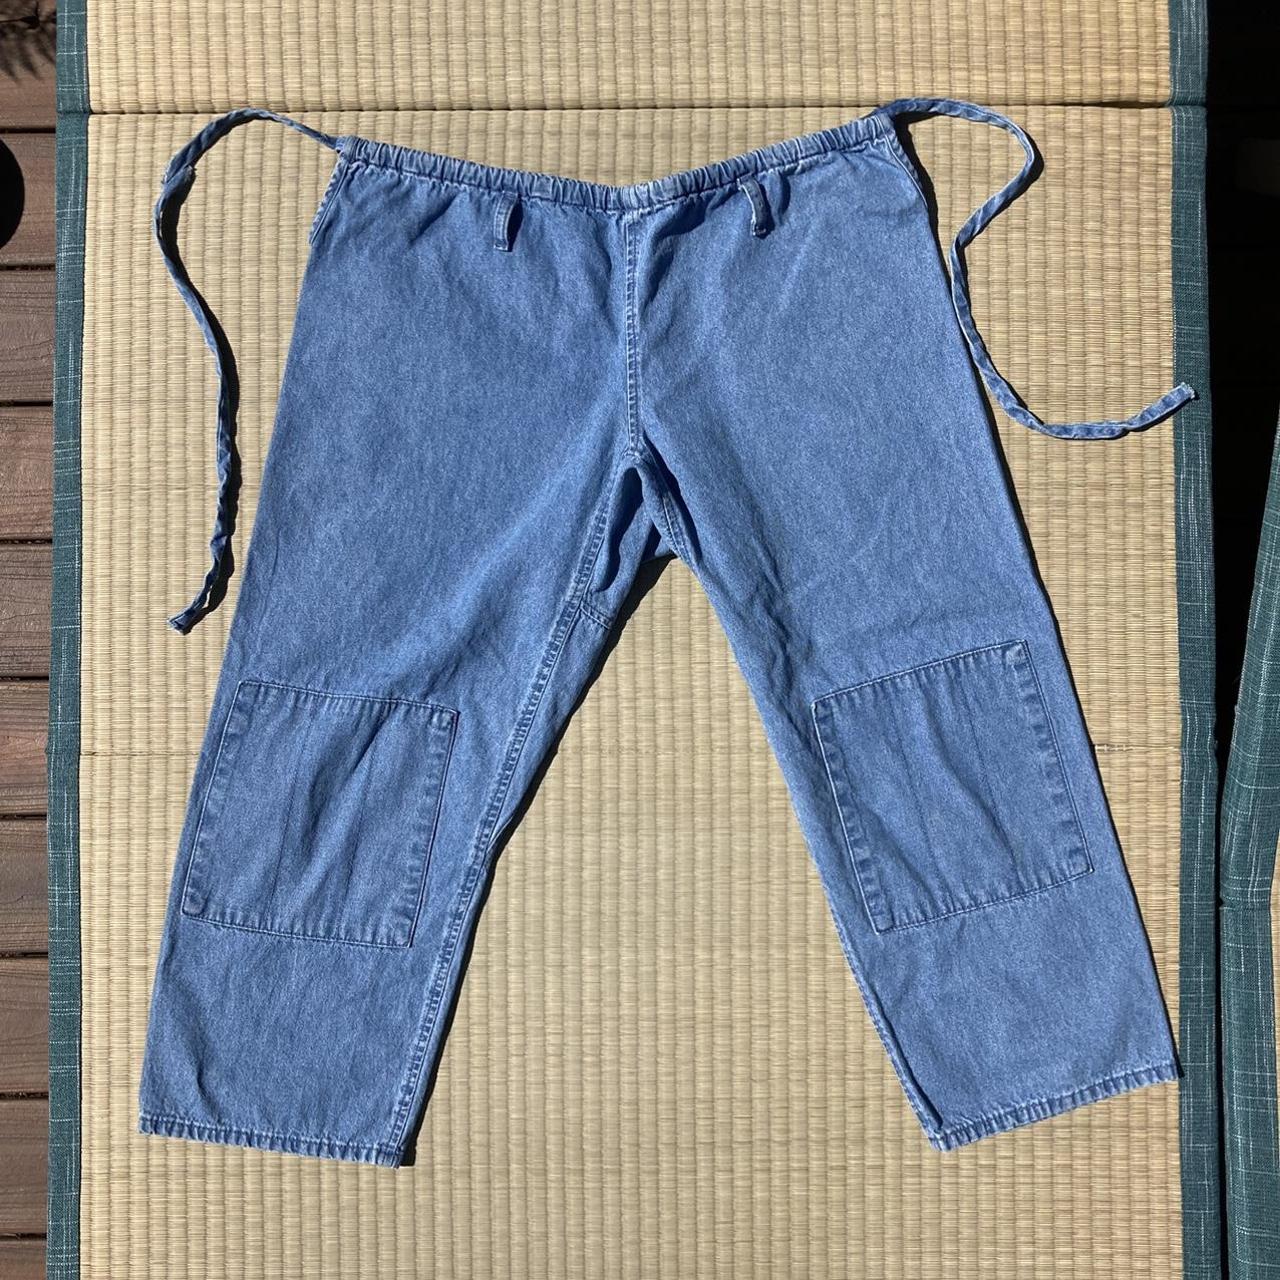 Product Image 2 - 69 Karate Pants

NEW

Bought this at